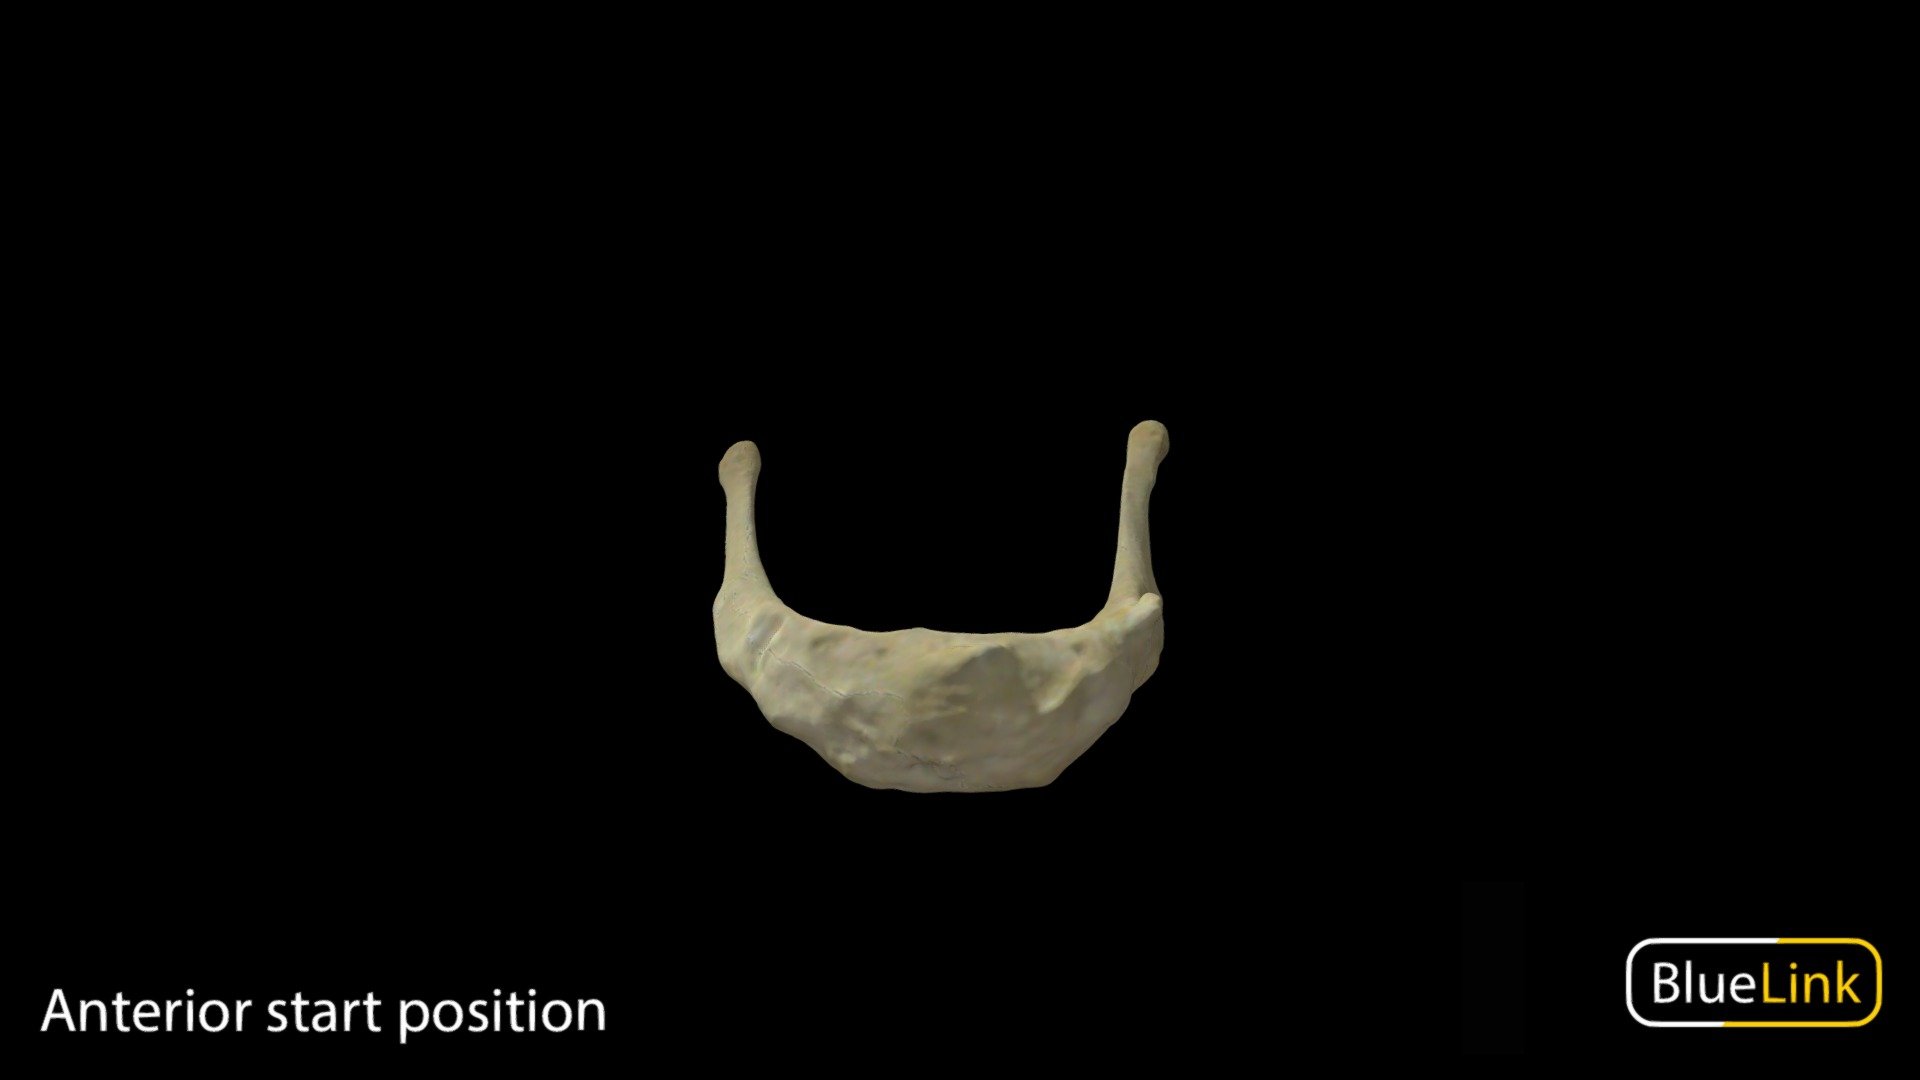 3D scan of the Hyoid

Captured with Einscan Pro

Captured and edited by: Will Gribbin

Copyright2019 BK Alsup &amp; GM Fox - Hyoid - 3D model by Bluelink Anatomy - University of Michigan (@bluelinkanatomy) 3d model